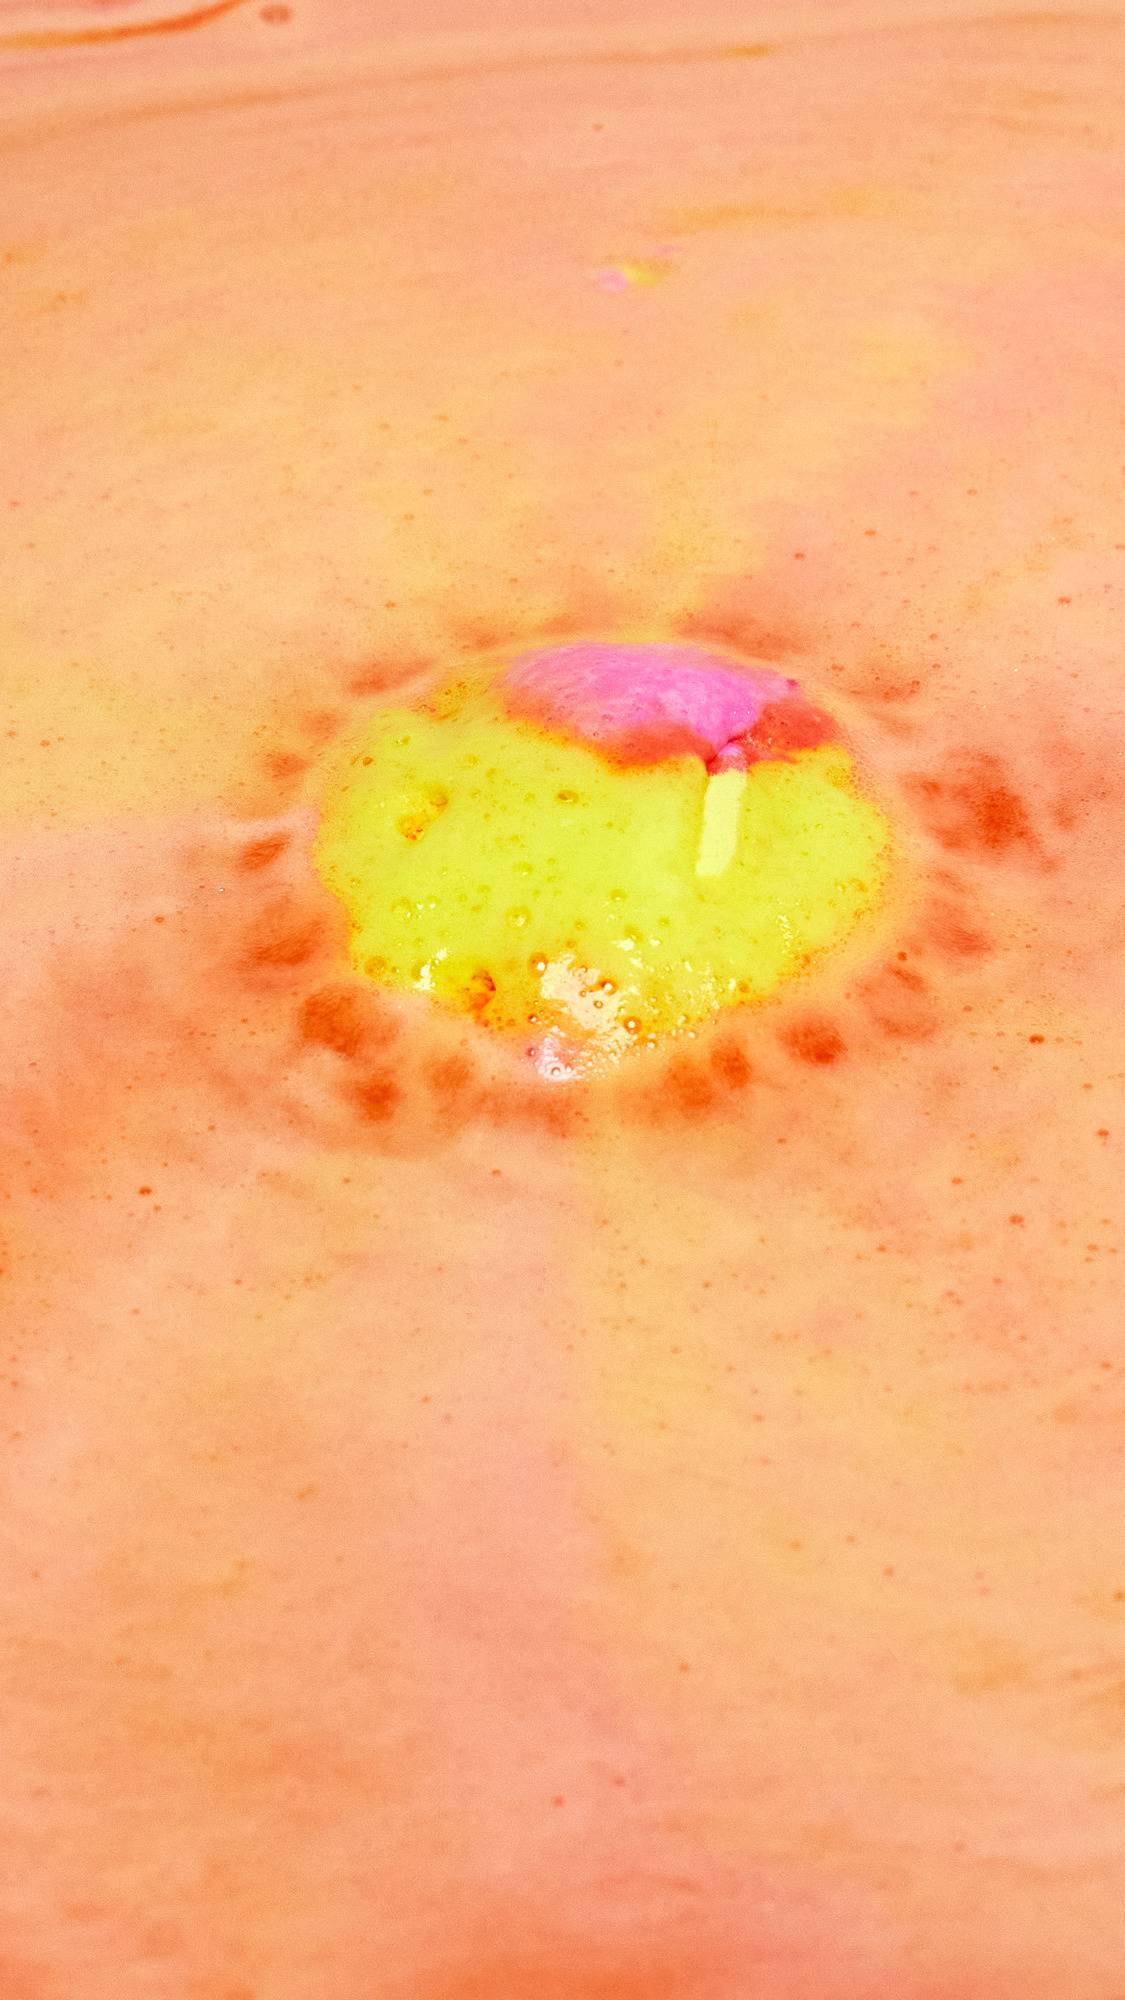 The Passion bath bomb is slowly dissolving creating swirling ripples of yellow, pink and orange with a bright burst of yellow in the centre.